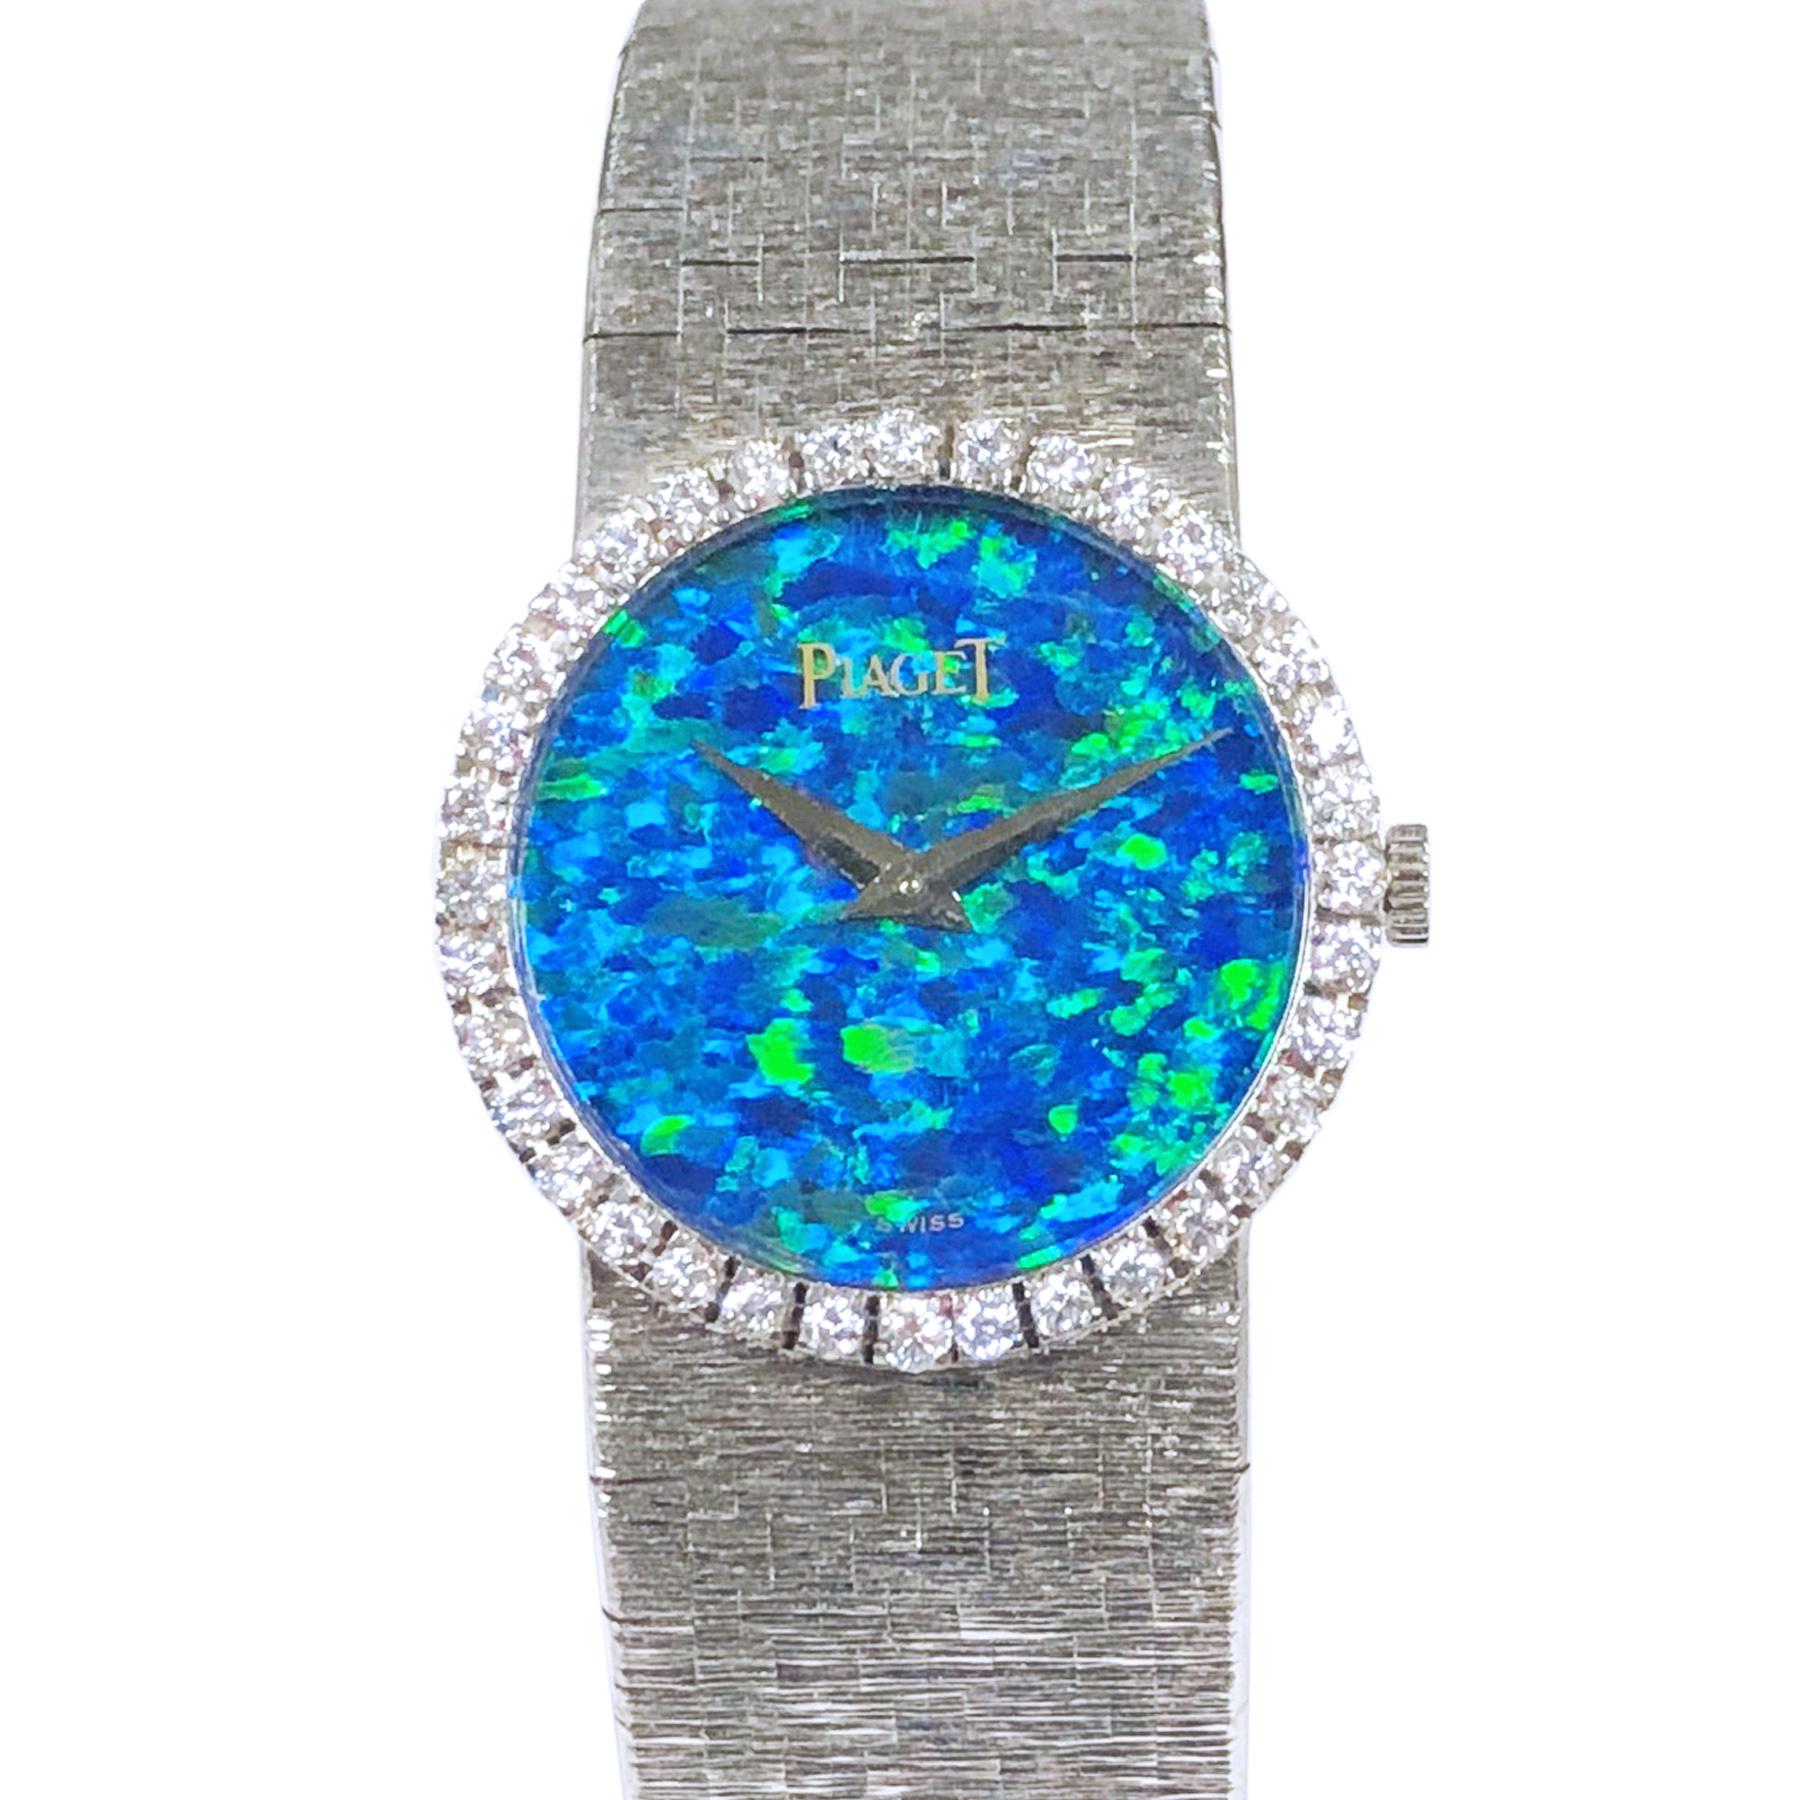 Piaget White Gold Diamond and Opal Dial Ladies Wrist Watch